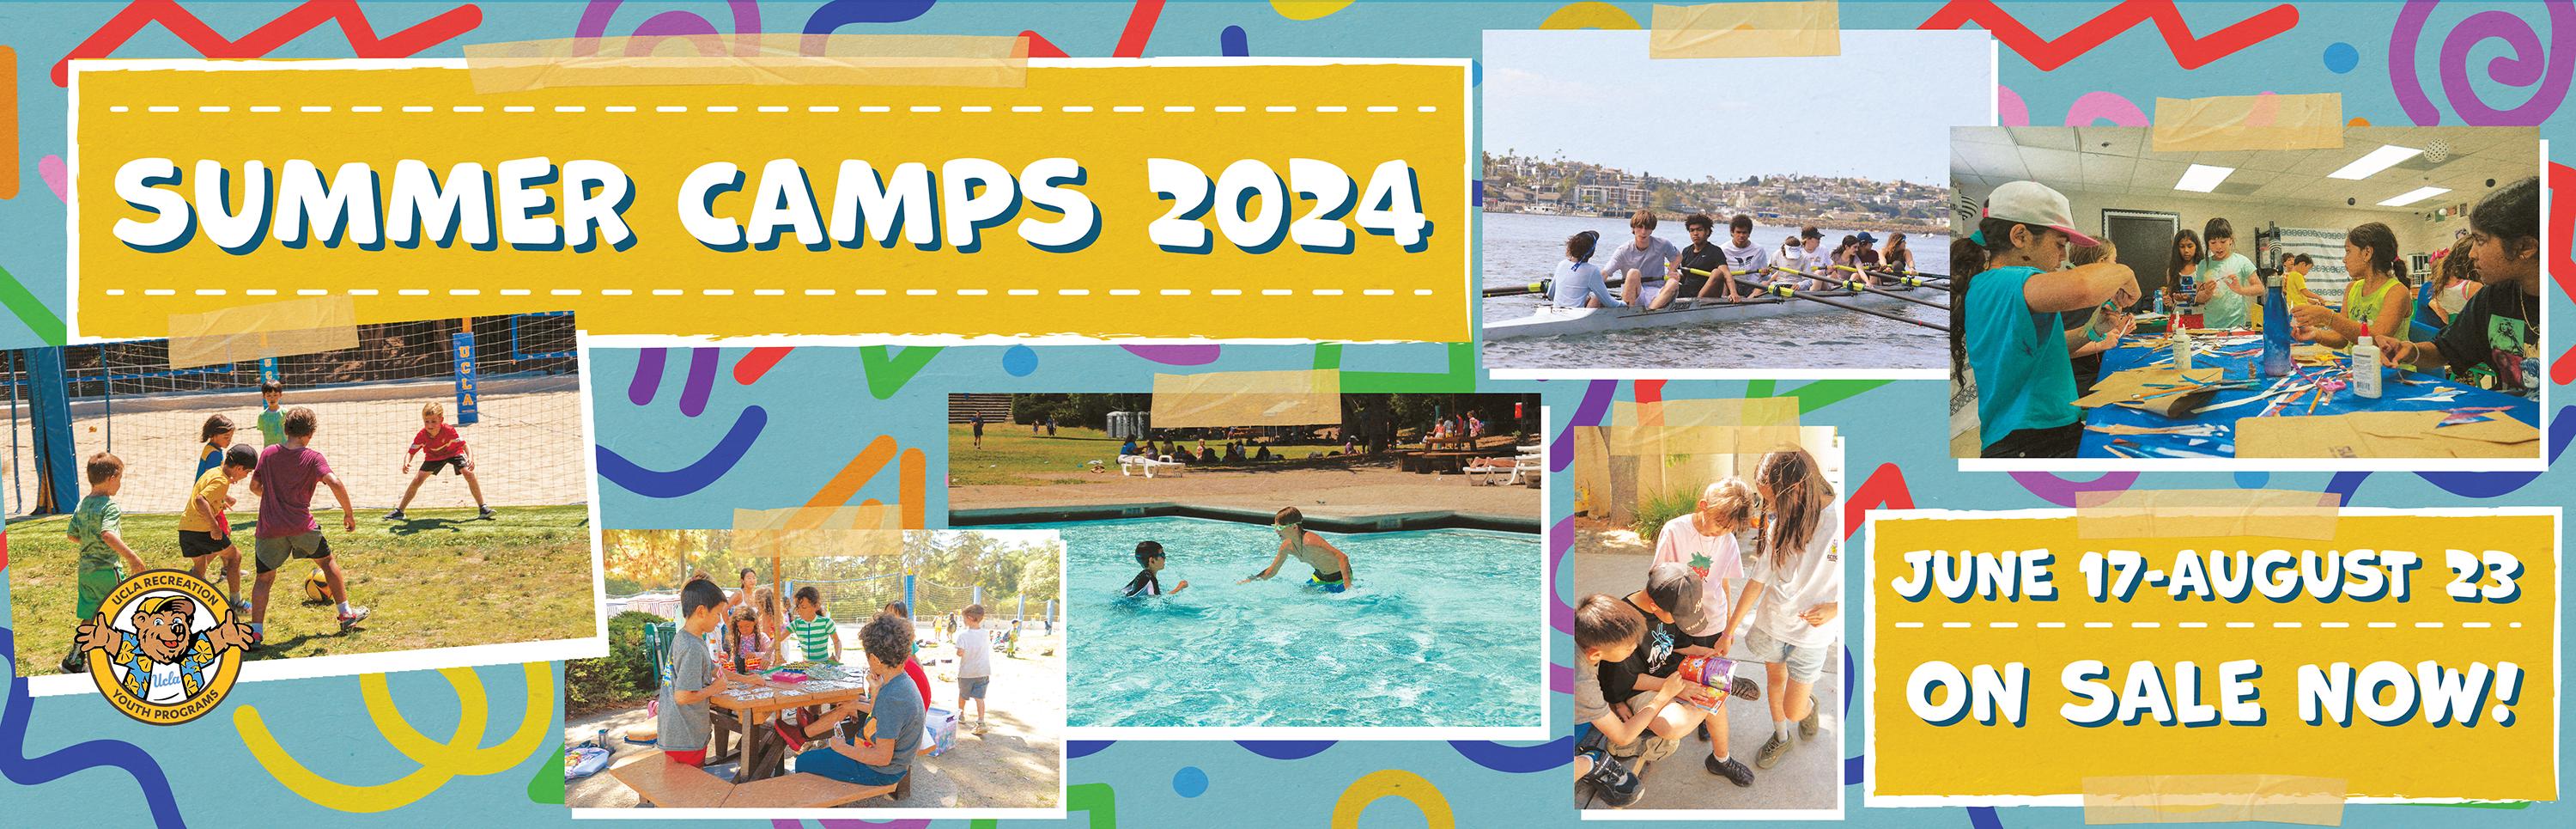 Summer Camps 2024. June 17 to August 23. On Sale Now!